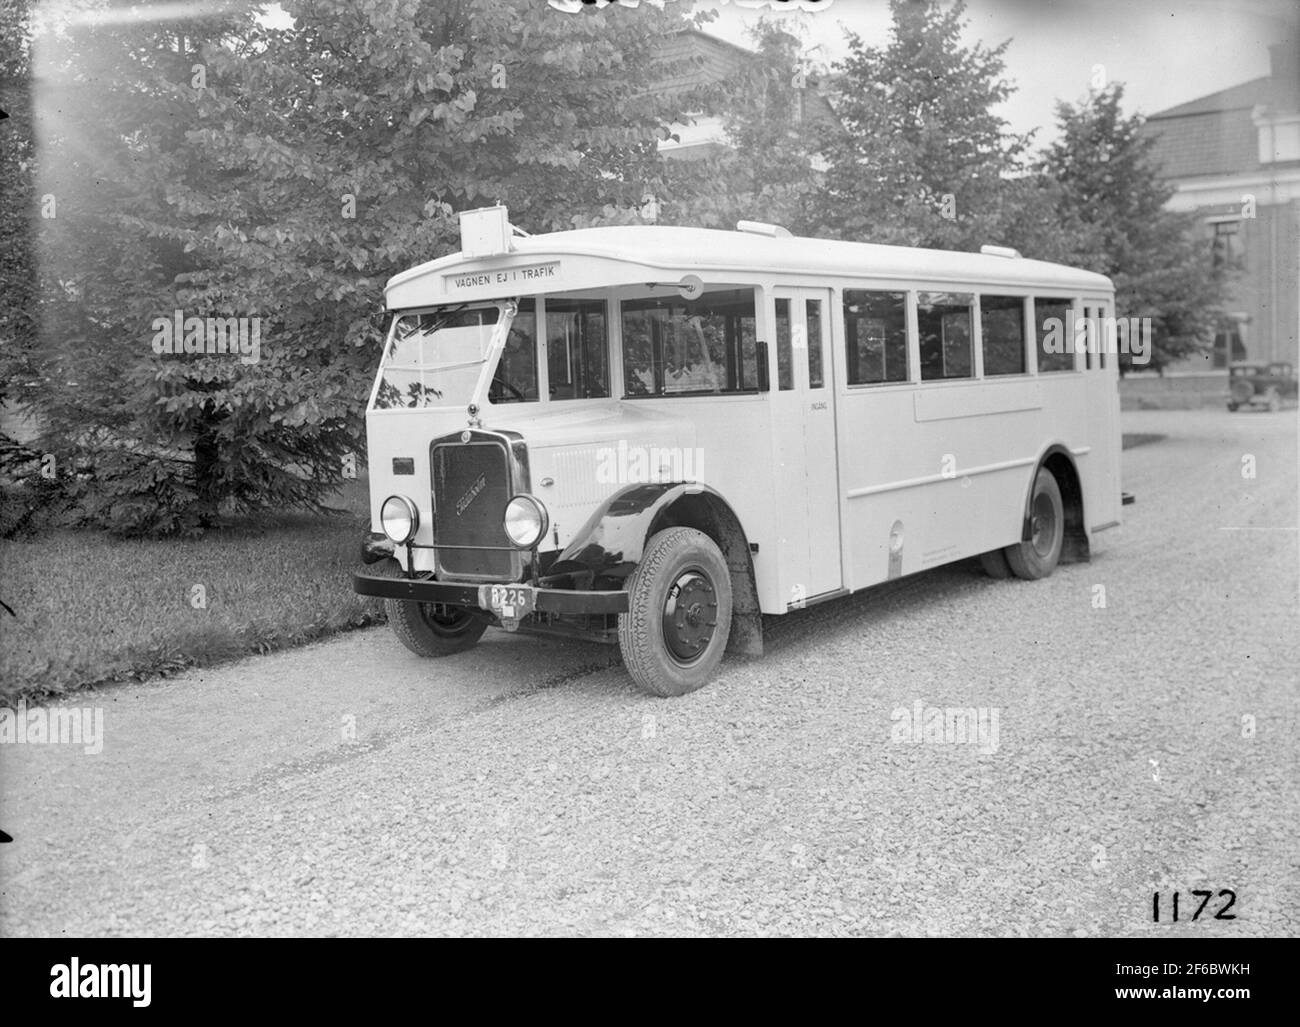 At least two Tidaholm buses to Brickbacken-Mellringe. These buses were delivered to AB Omnibus in Örebro who conducted city traffic in Örebro where said line was included. The company was started in 1922 by Bengt Gilmark and John Tjernvik to run by Gilmark after a few years. In 1938, the company was sold to Knut Oskar Gustavson who retained the company name since he in turn selling city traffic to Örebro city in 1947. On one of the buses on these pictures, there is advertising for the insurance company Ocean. This company was also driven by Gilmark. The images should be placed under Örebro Cou Stock Photo